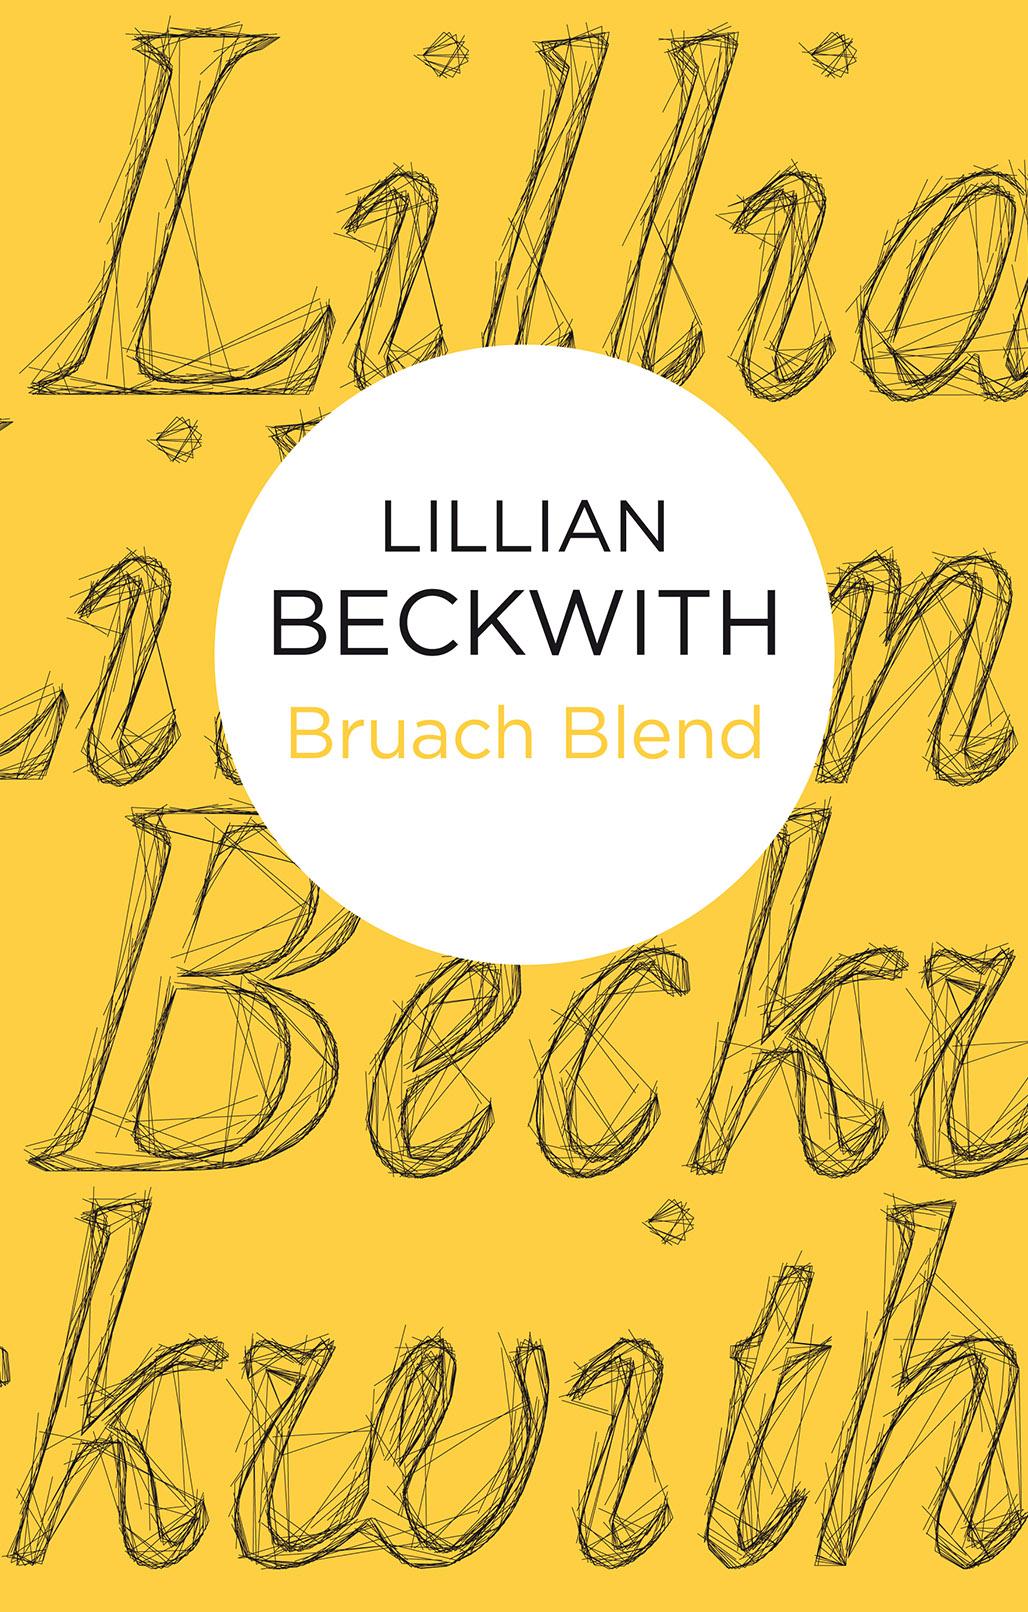 Bruach Blend by Lillian Beckwith